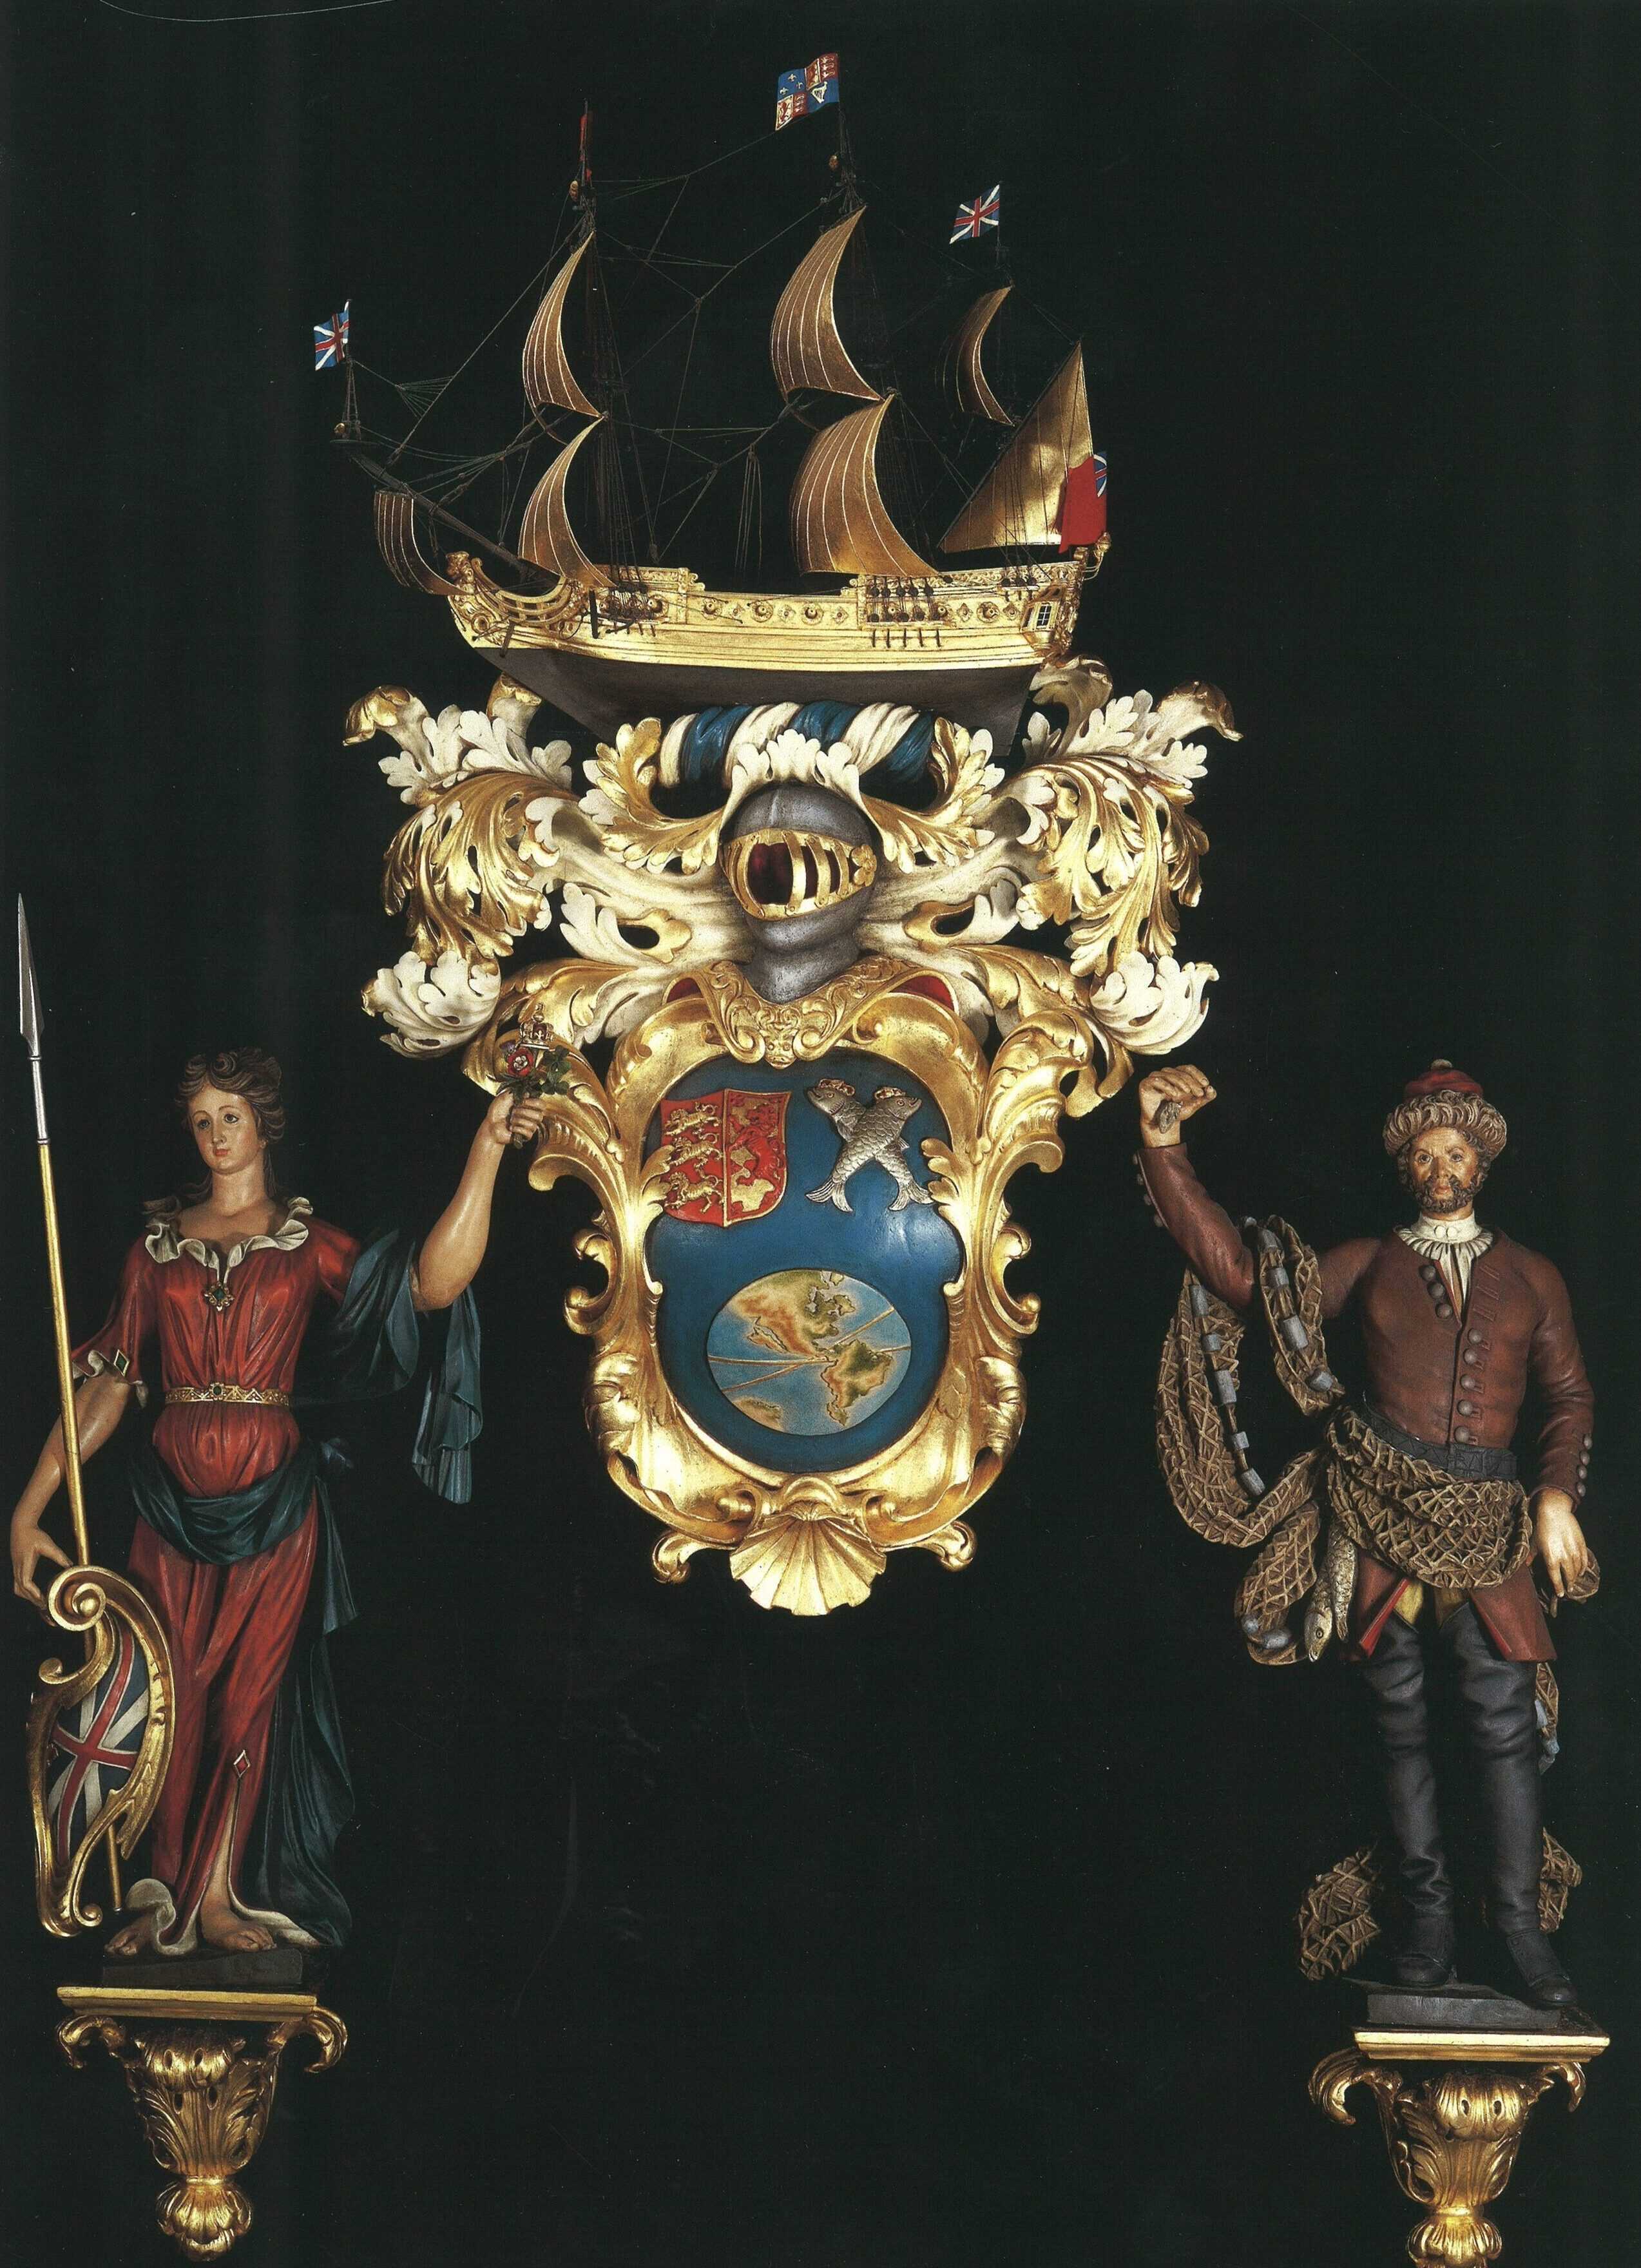 Illustration of Coat of Arms of the South Sea Company